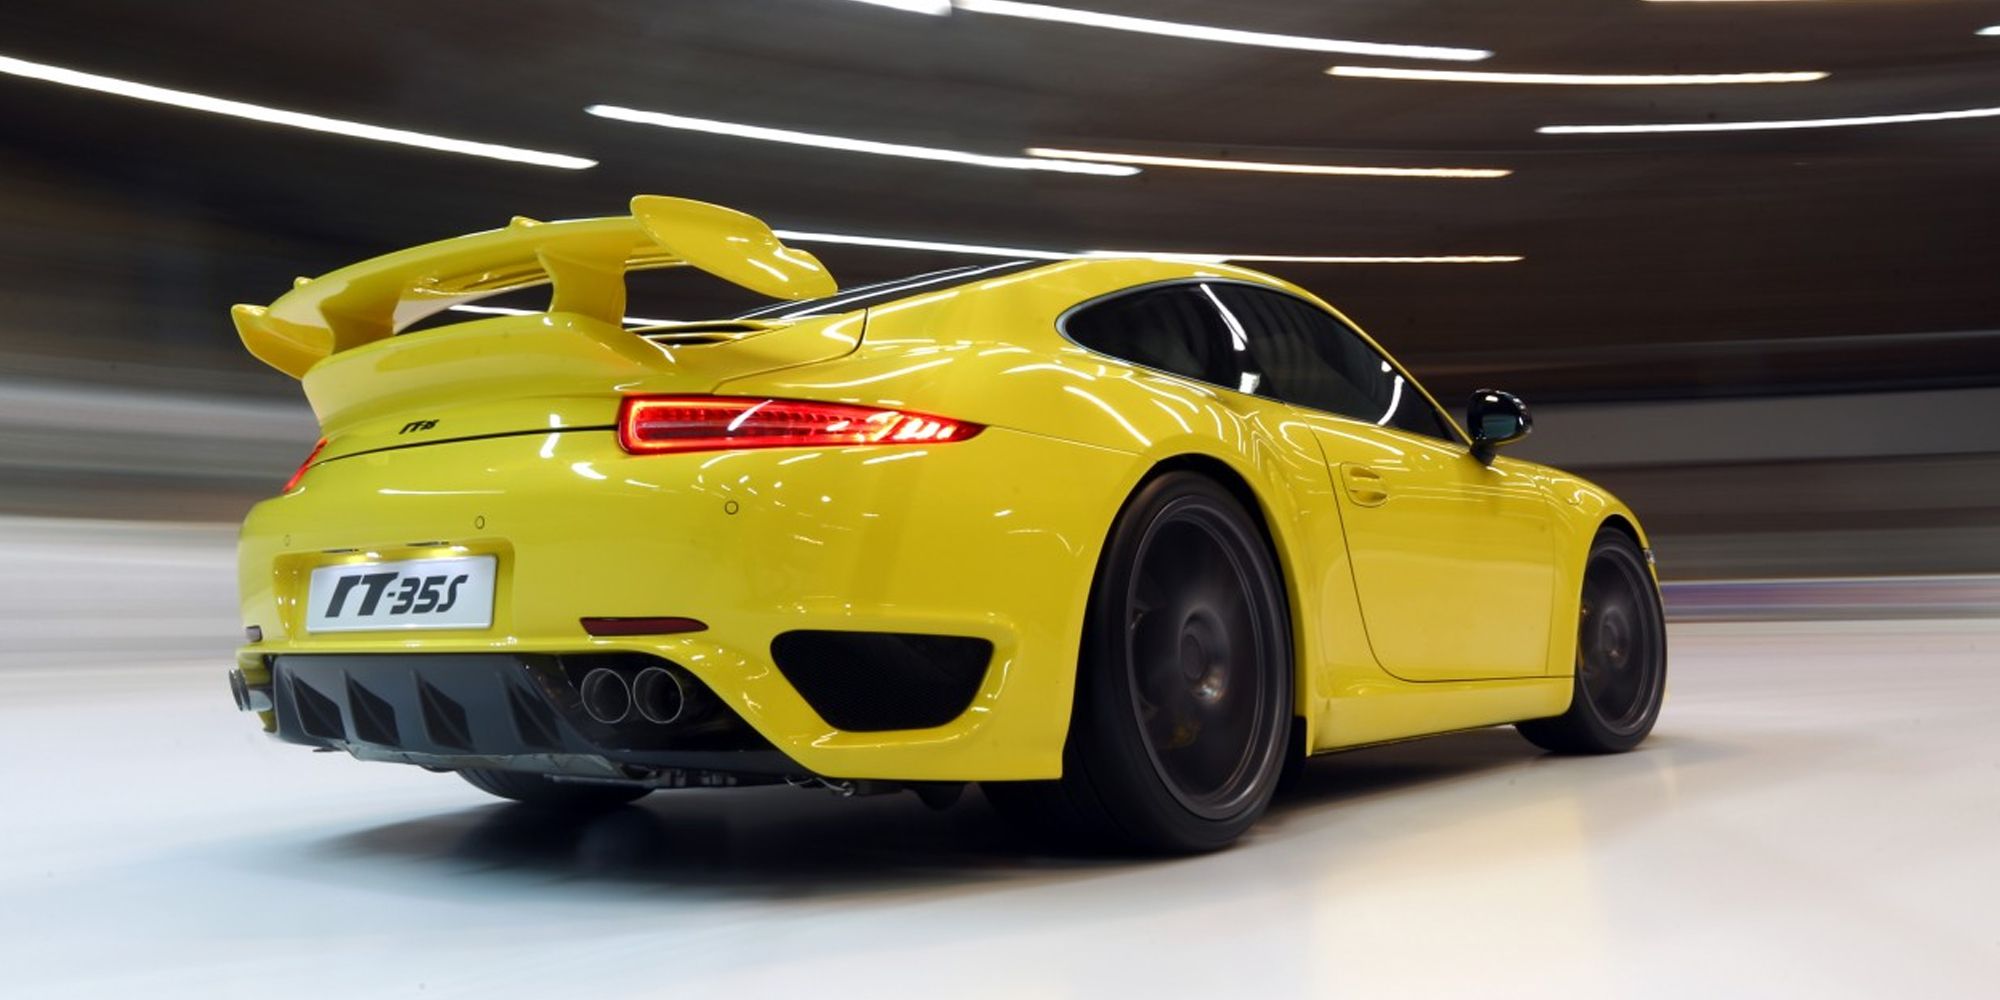 The rear of a yellow RT35 S